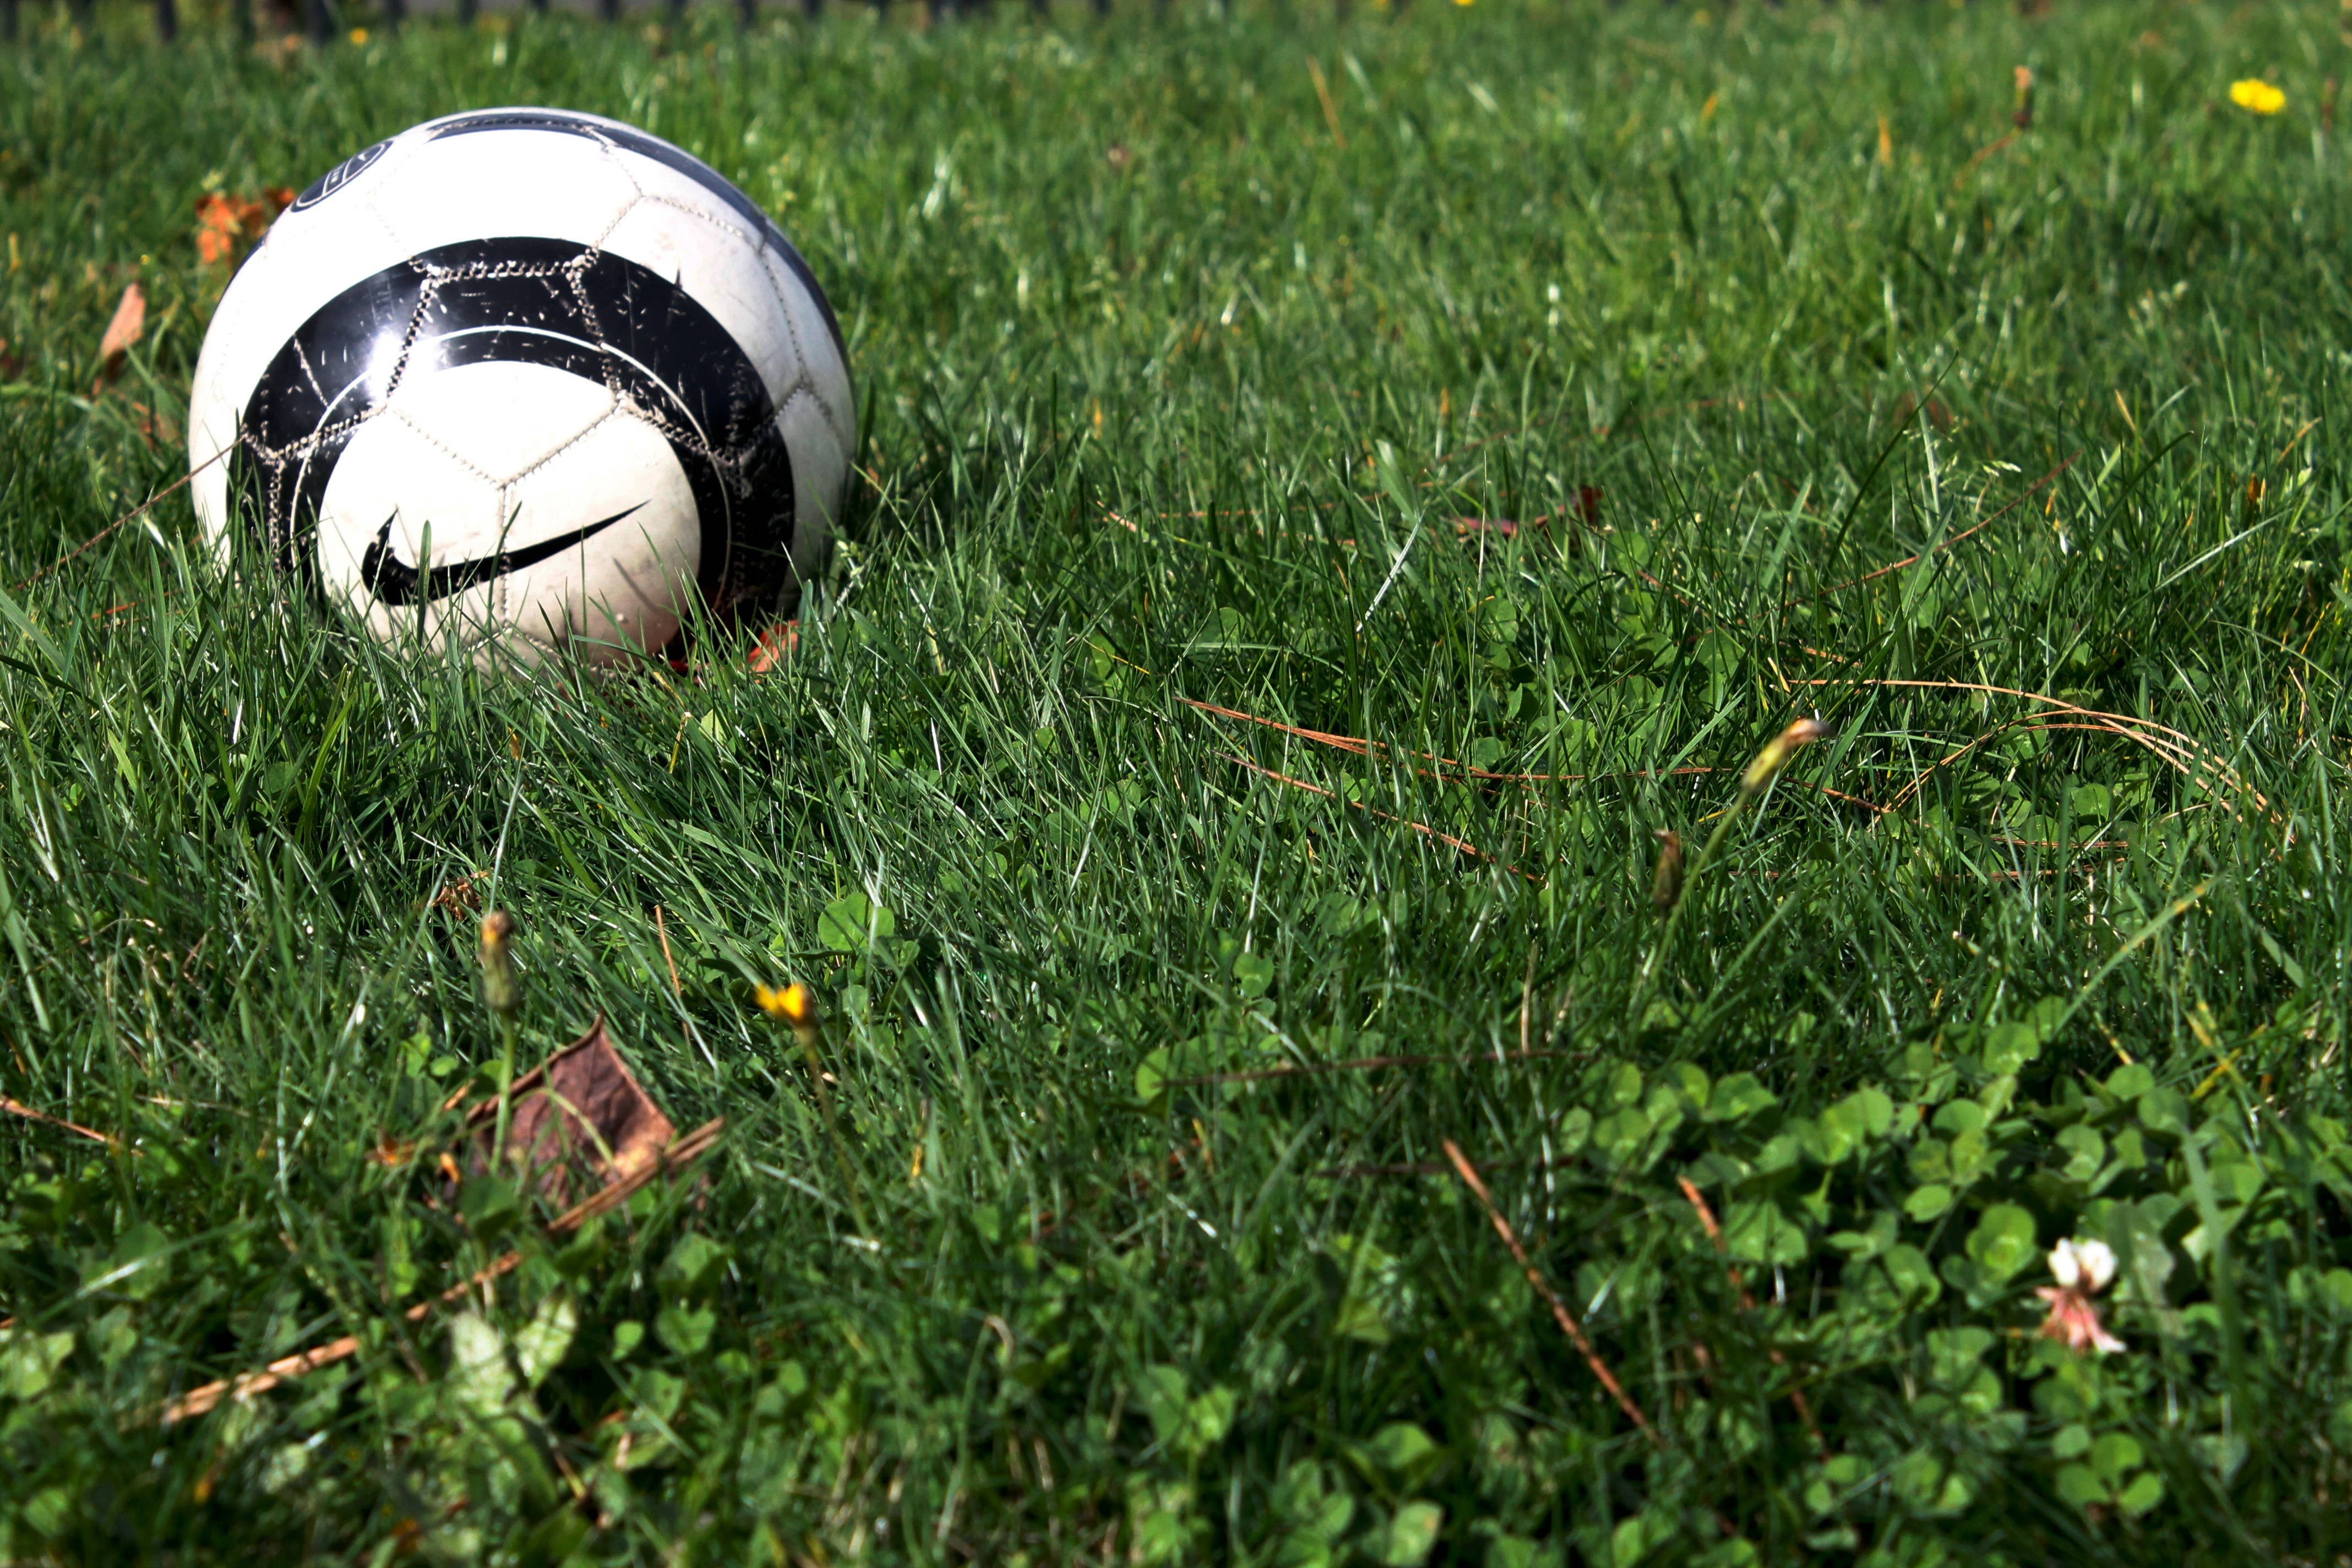 A Nike Ball In The Grass Background